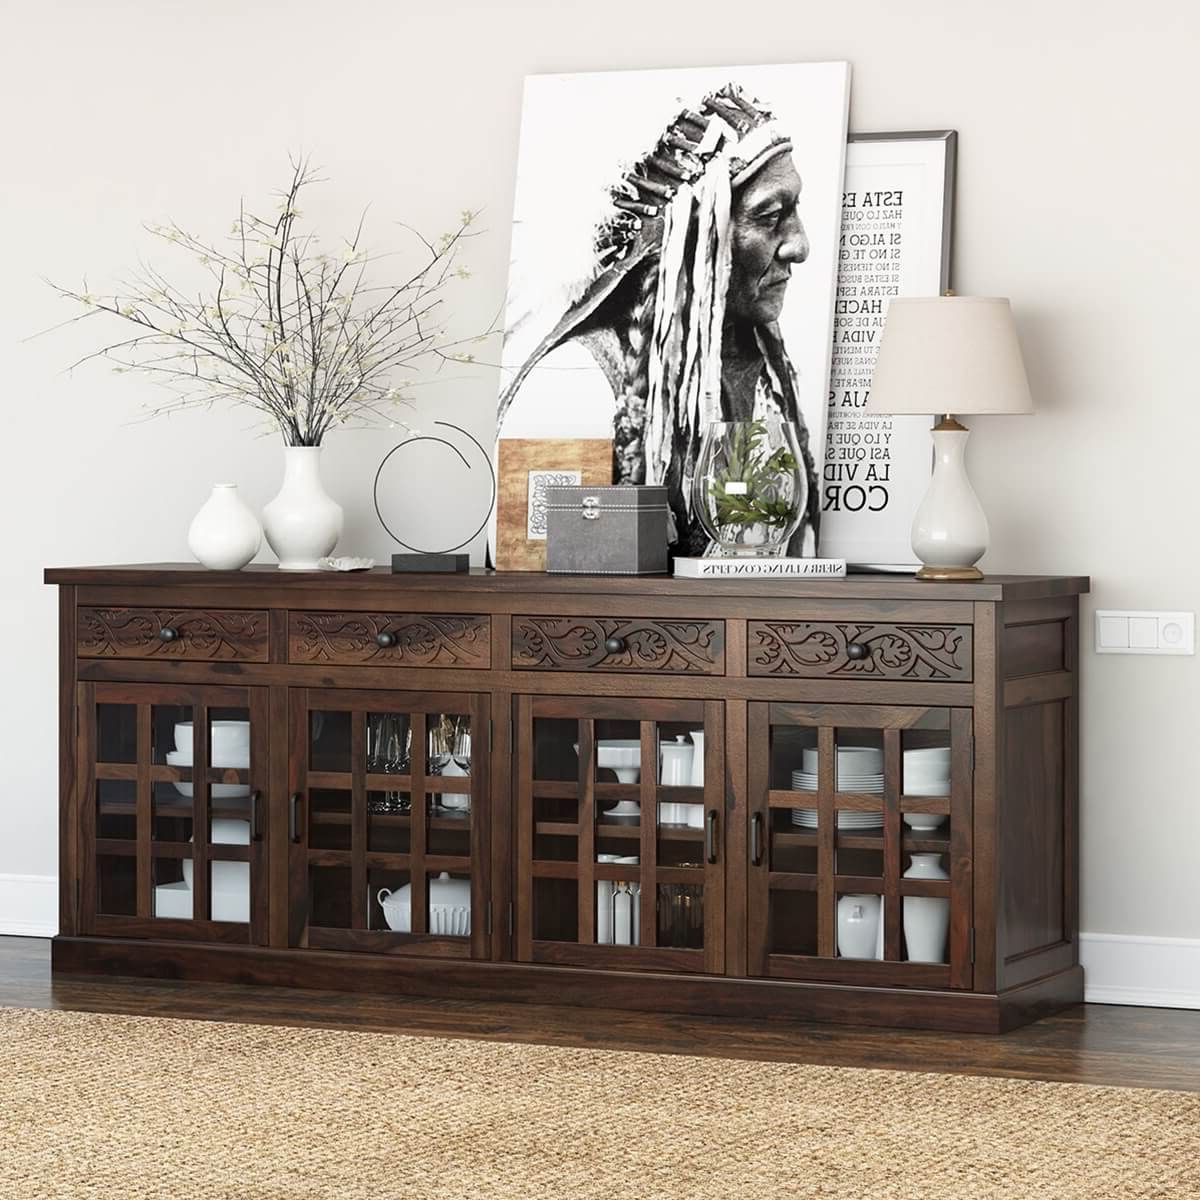 Dallas Ranch Rustic Solid Wood 4 Drawer Extra Long Buffet Cabinet Pertaining To Trendy Solid Wood Buffet Sideboards (View 3 of 10)